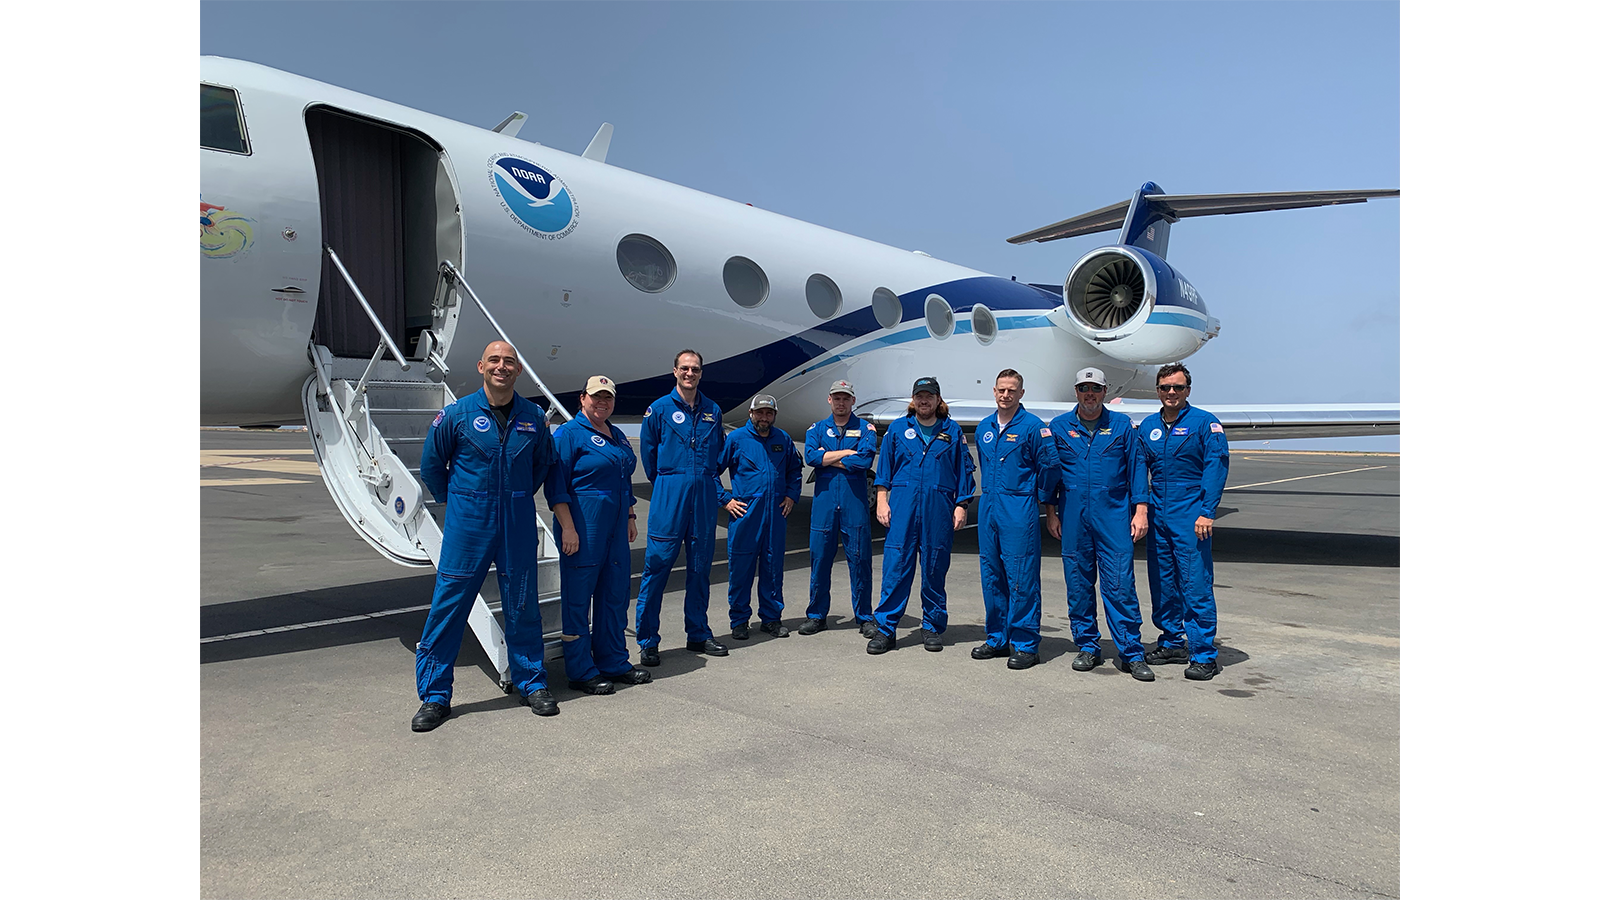 NOAA researchers, pilots, and crew in their blue flight suits stand in front of a NOAA G-IV Hurricane Hunter aircraft.